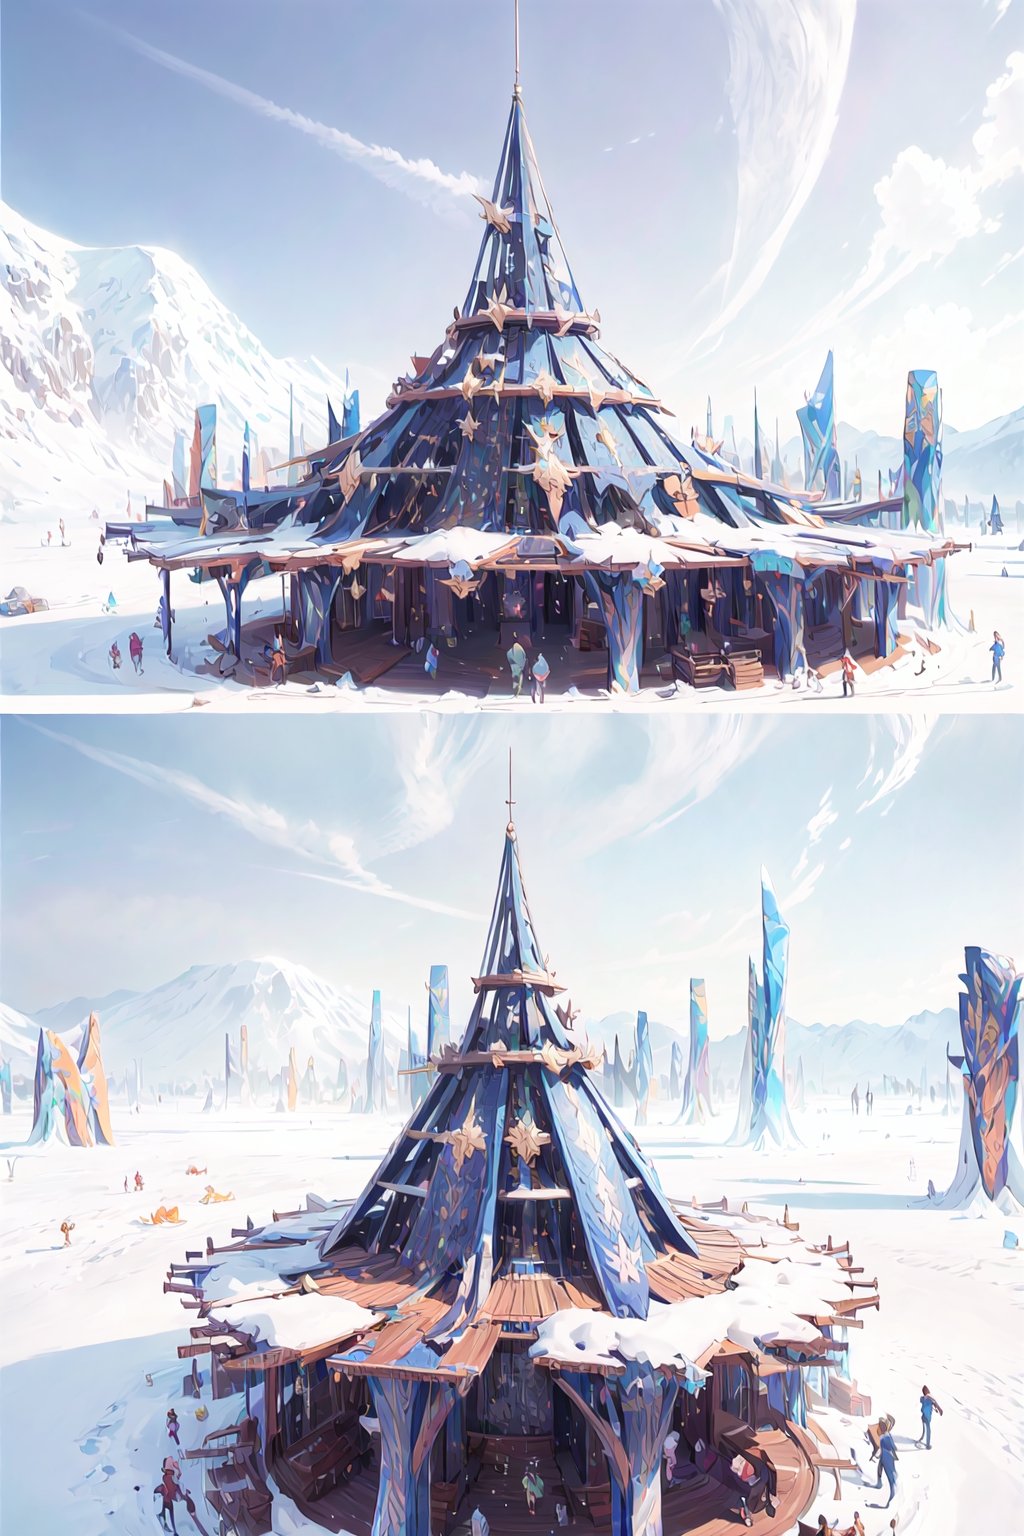 masterpiece, panels solar tree. on top of the snow, very high quality, ultra high definition, 32K, ultra photorealistic, high detail, more detail, BurningMan festival style, meting point statue,velvaura